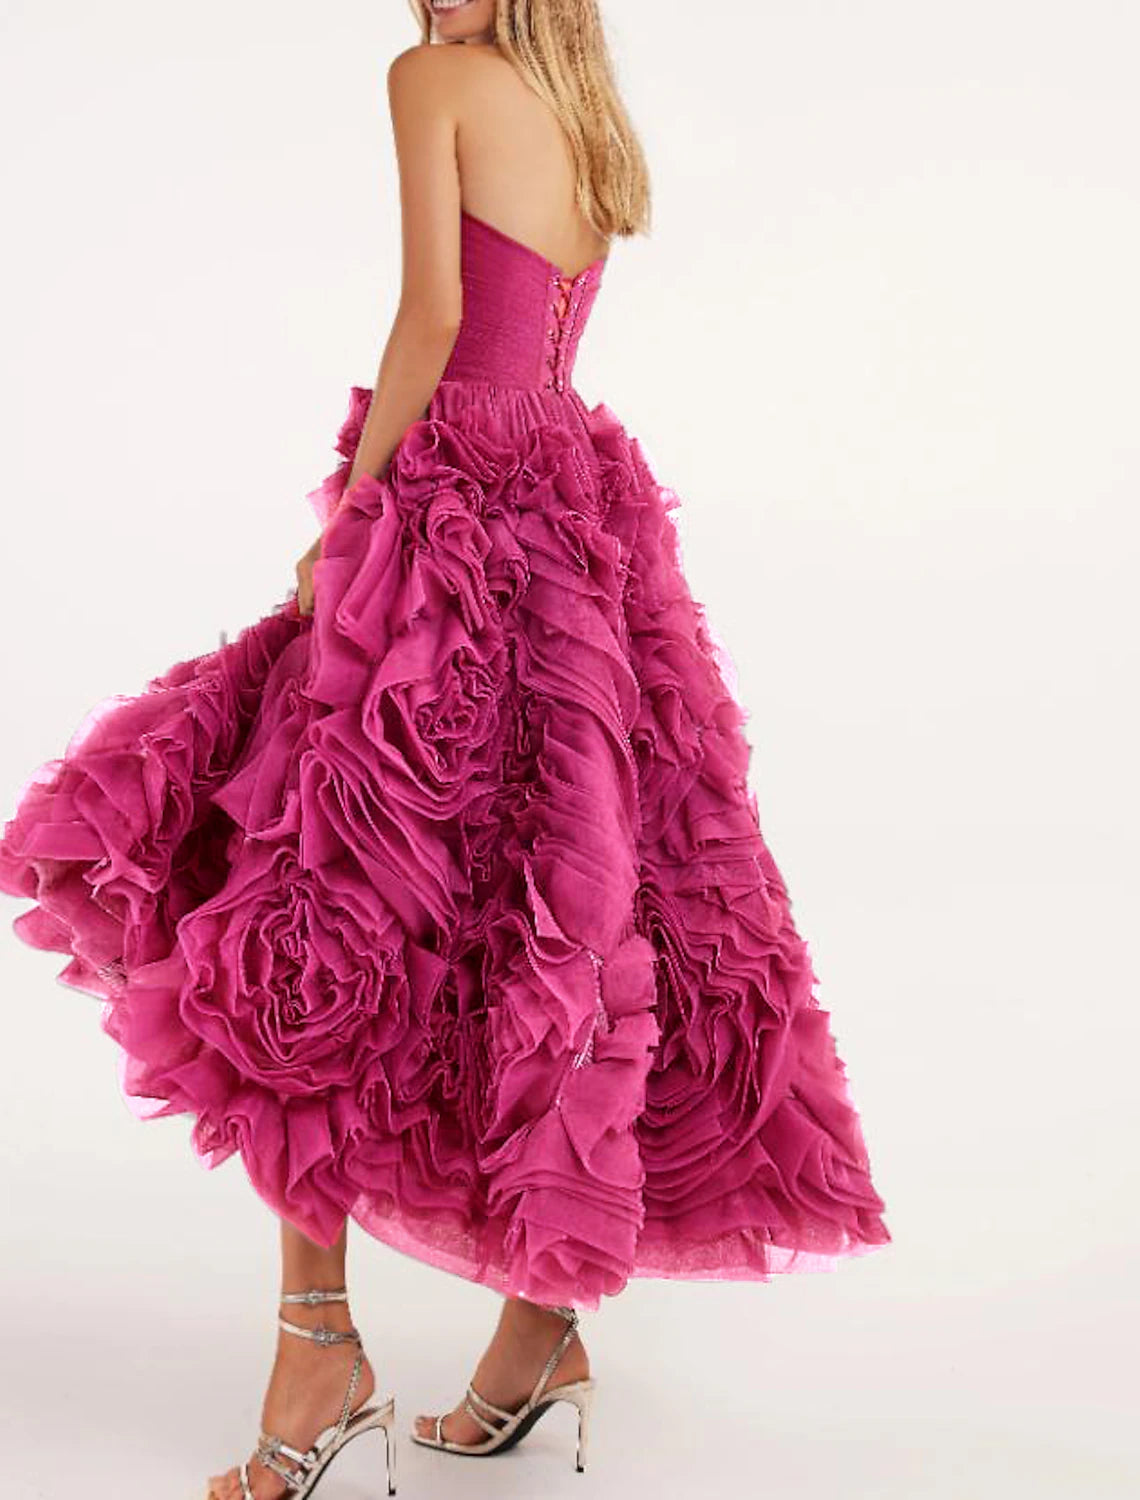 A-Line Prom Dresses Floral Dress Masquerade Ankle Length Sleeveless Strapless Tulle Backless with Floral